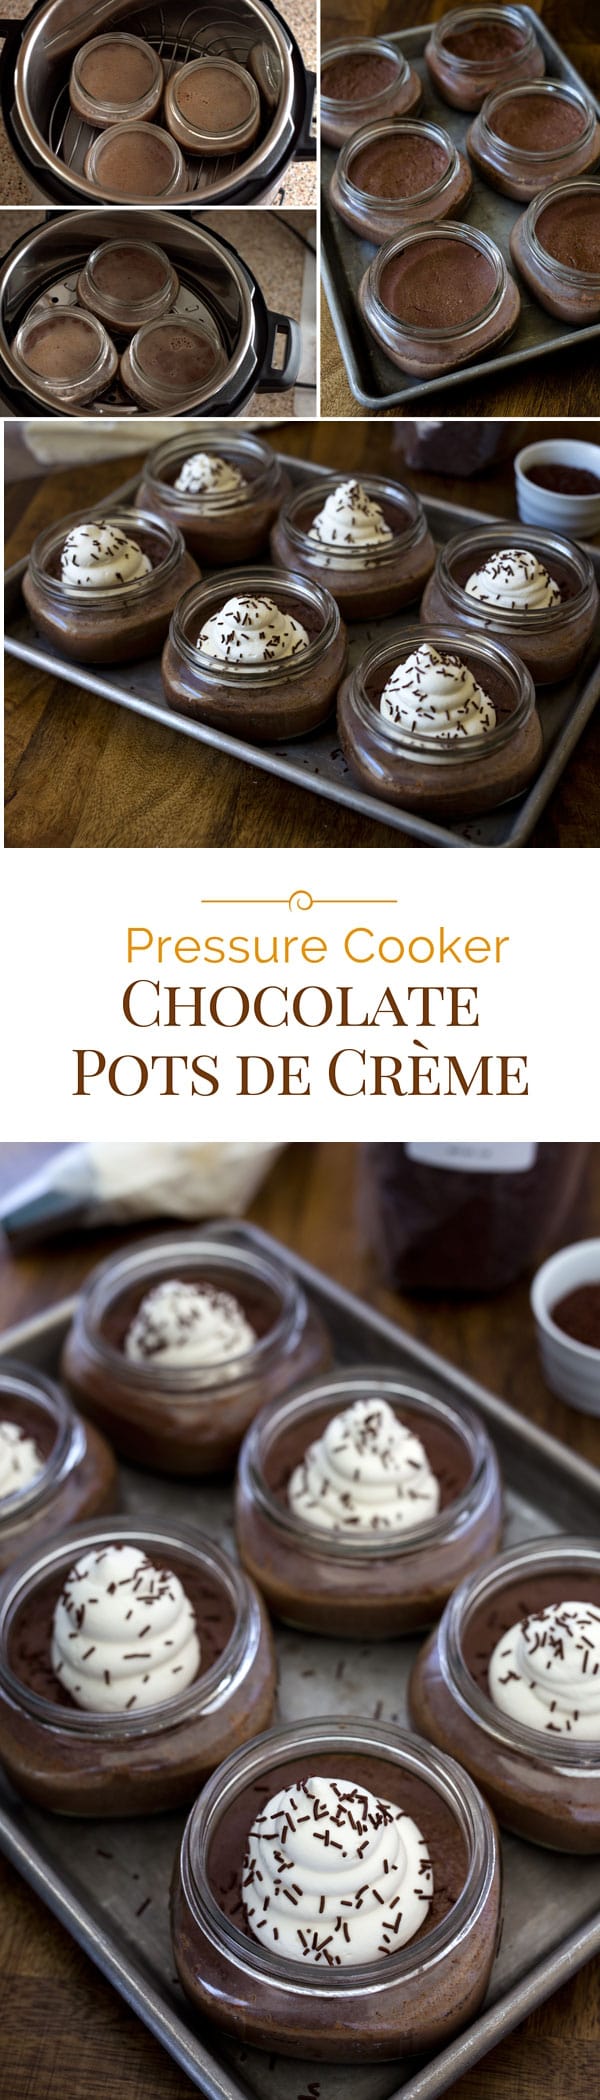 Chocolate Pots de Crème is a decadent and creamy chocolate custard dessert. Baked chocolate custard made in an Instant Pot is effortless and quick. This Pressure Cooker Chocolate Pots de Crème recipe is elegant enough for entertaining, but simple enough for a casual weeknight dessert. #instantpot #pressurecooking #dessertrecipe #chocolate via @PressureCook2da